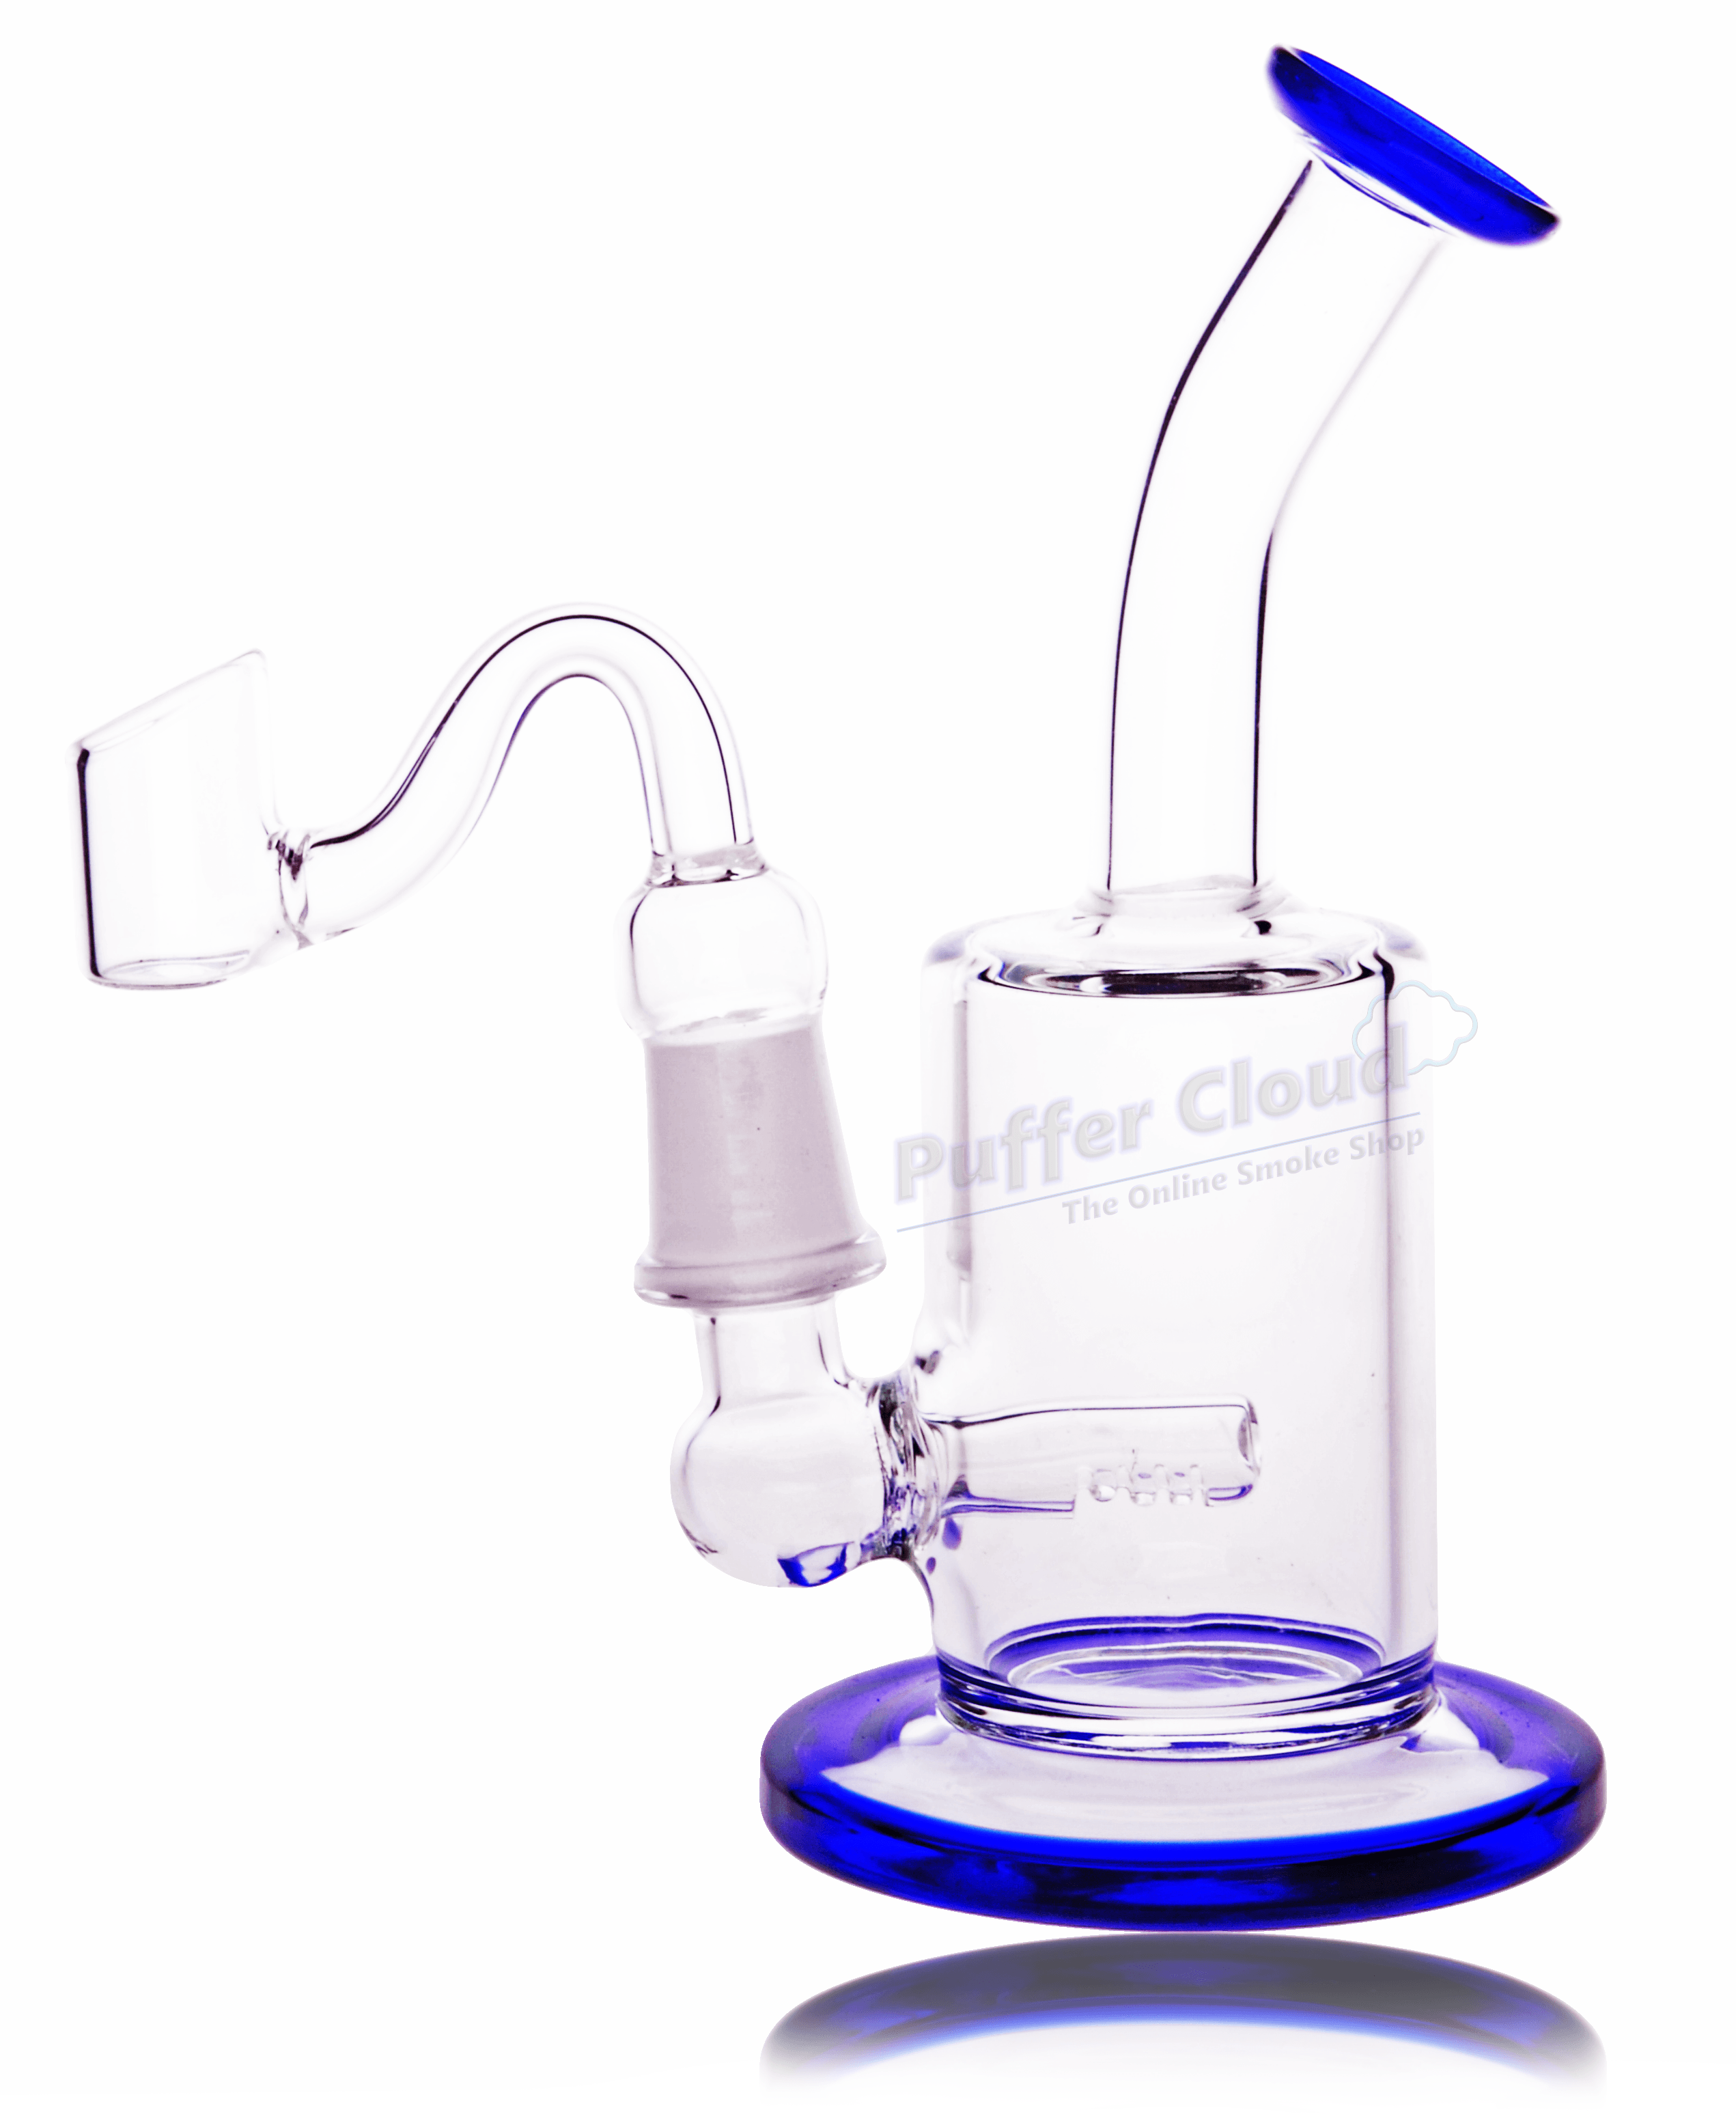 6" Inline Perc Dab Rig - Puffer Cloud | The World's Best Online Smoke and Head Shop